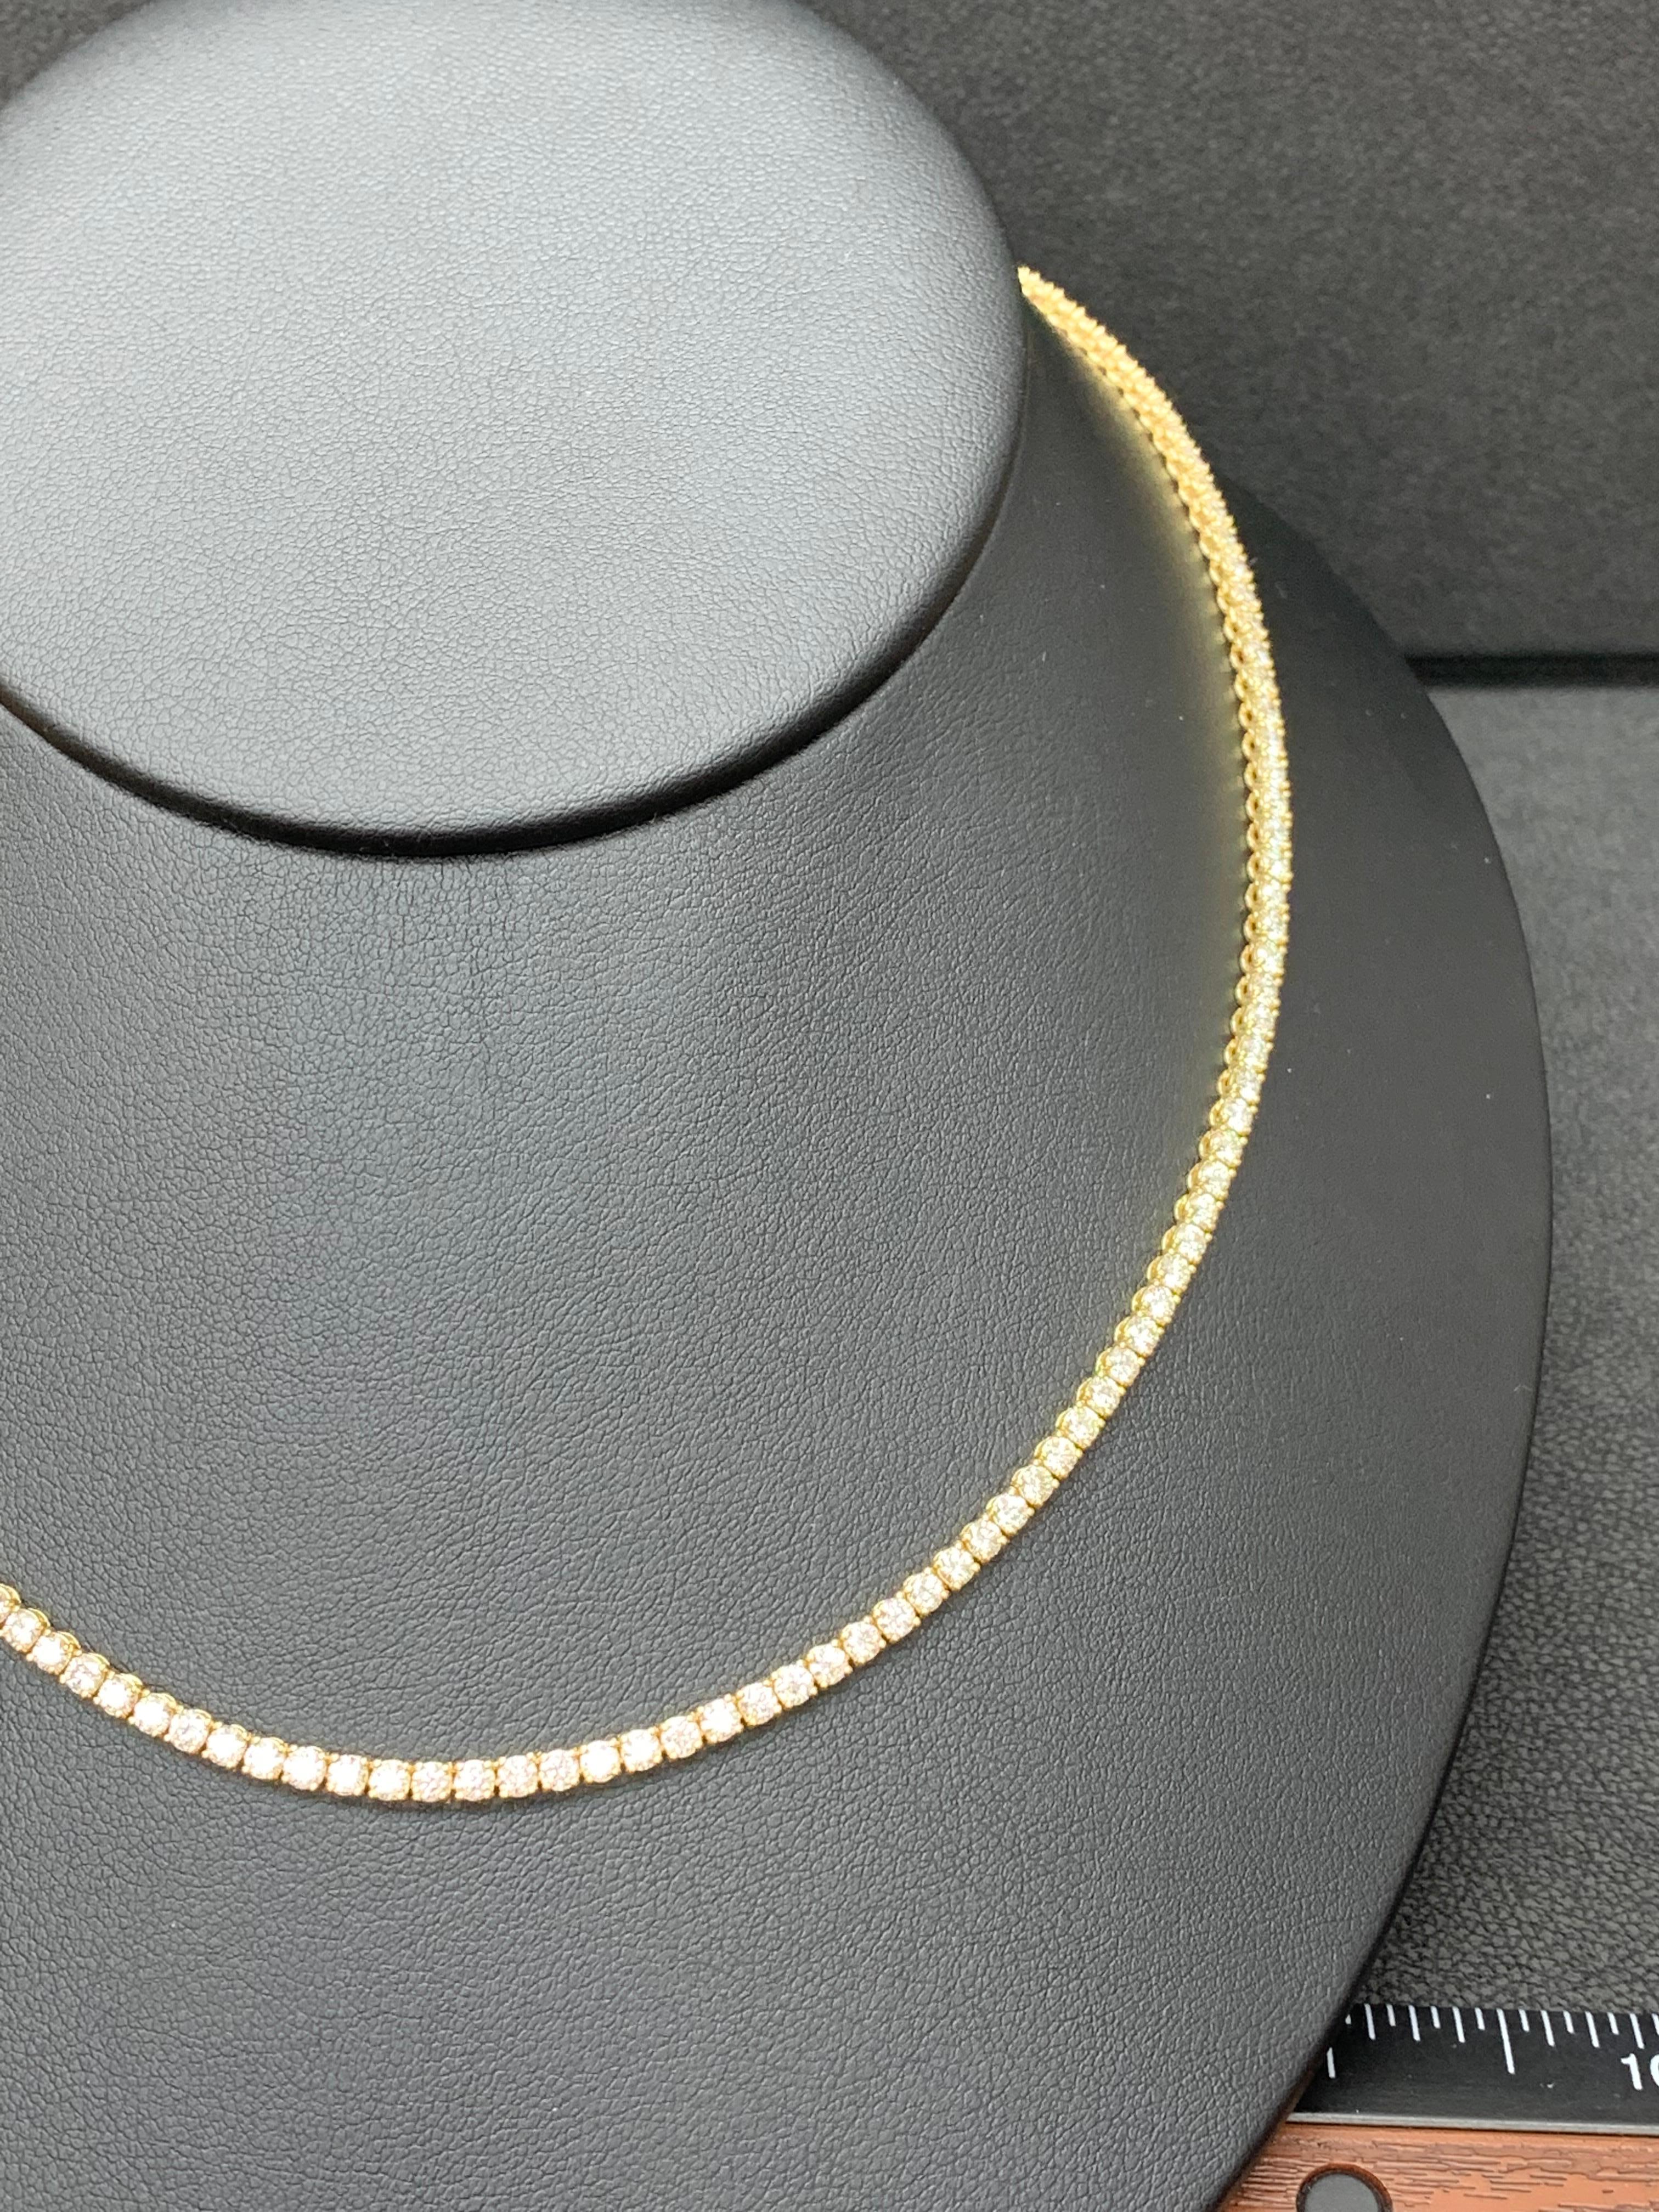 Modern 8.37 Carat Diamond Tennis Necklace in 14K Yellow Gold For Sale